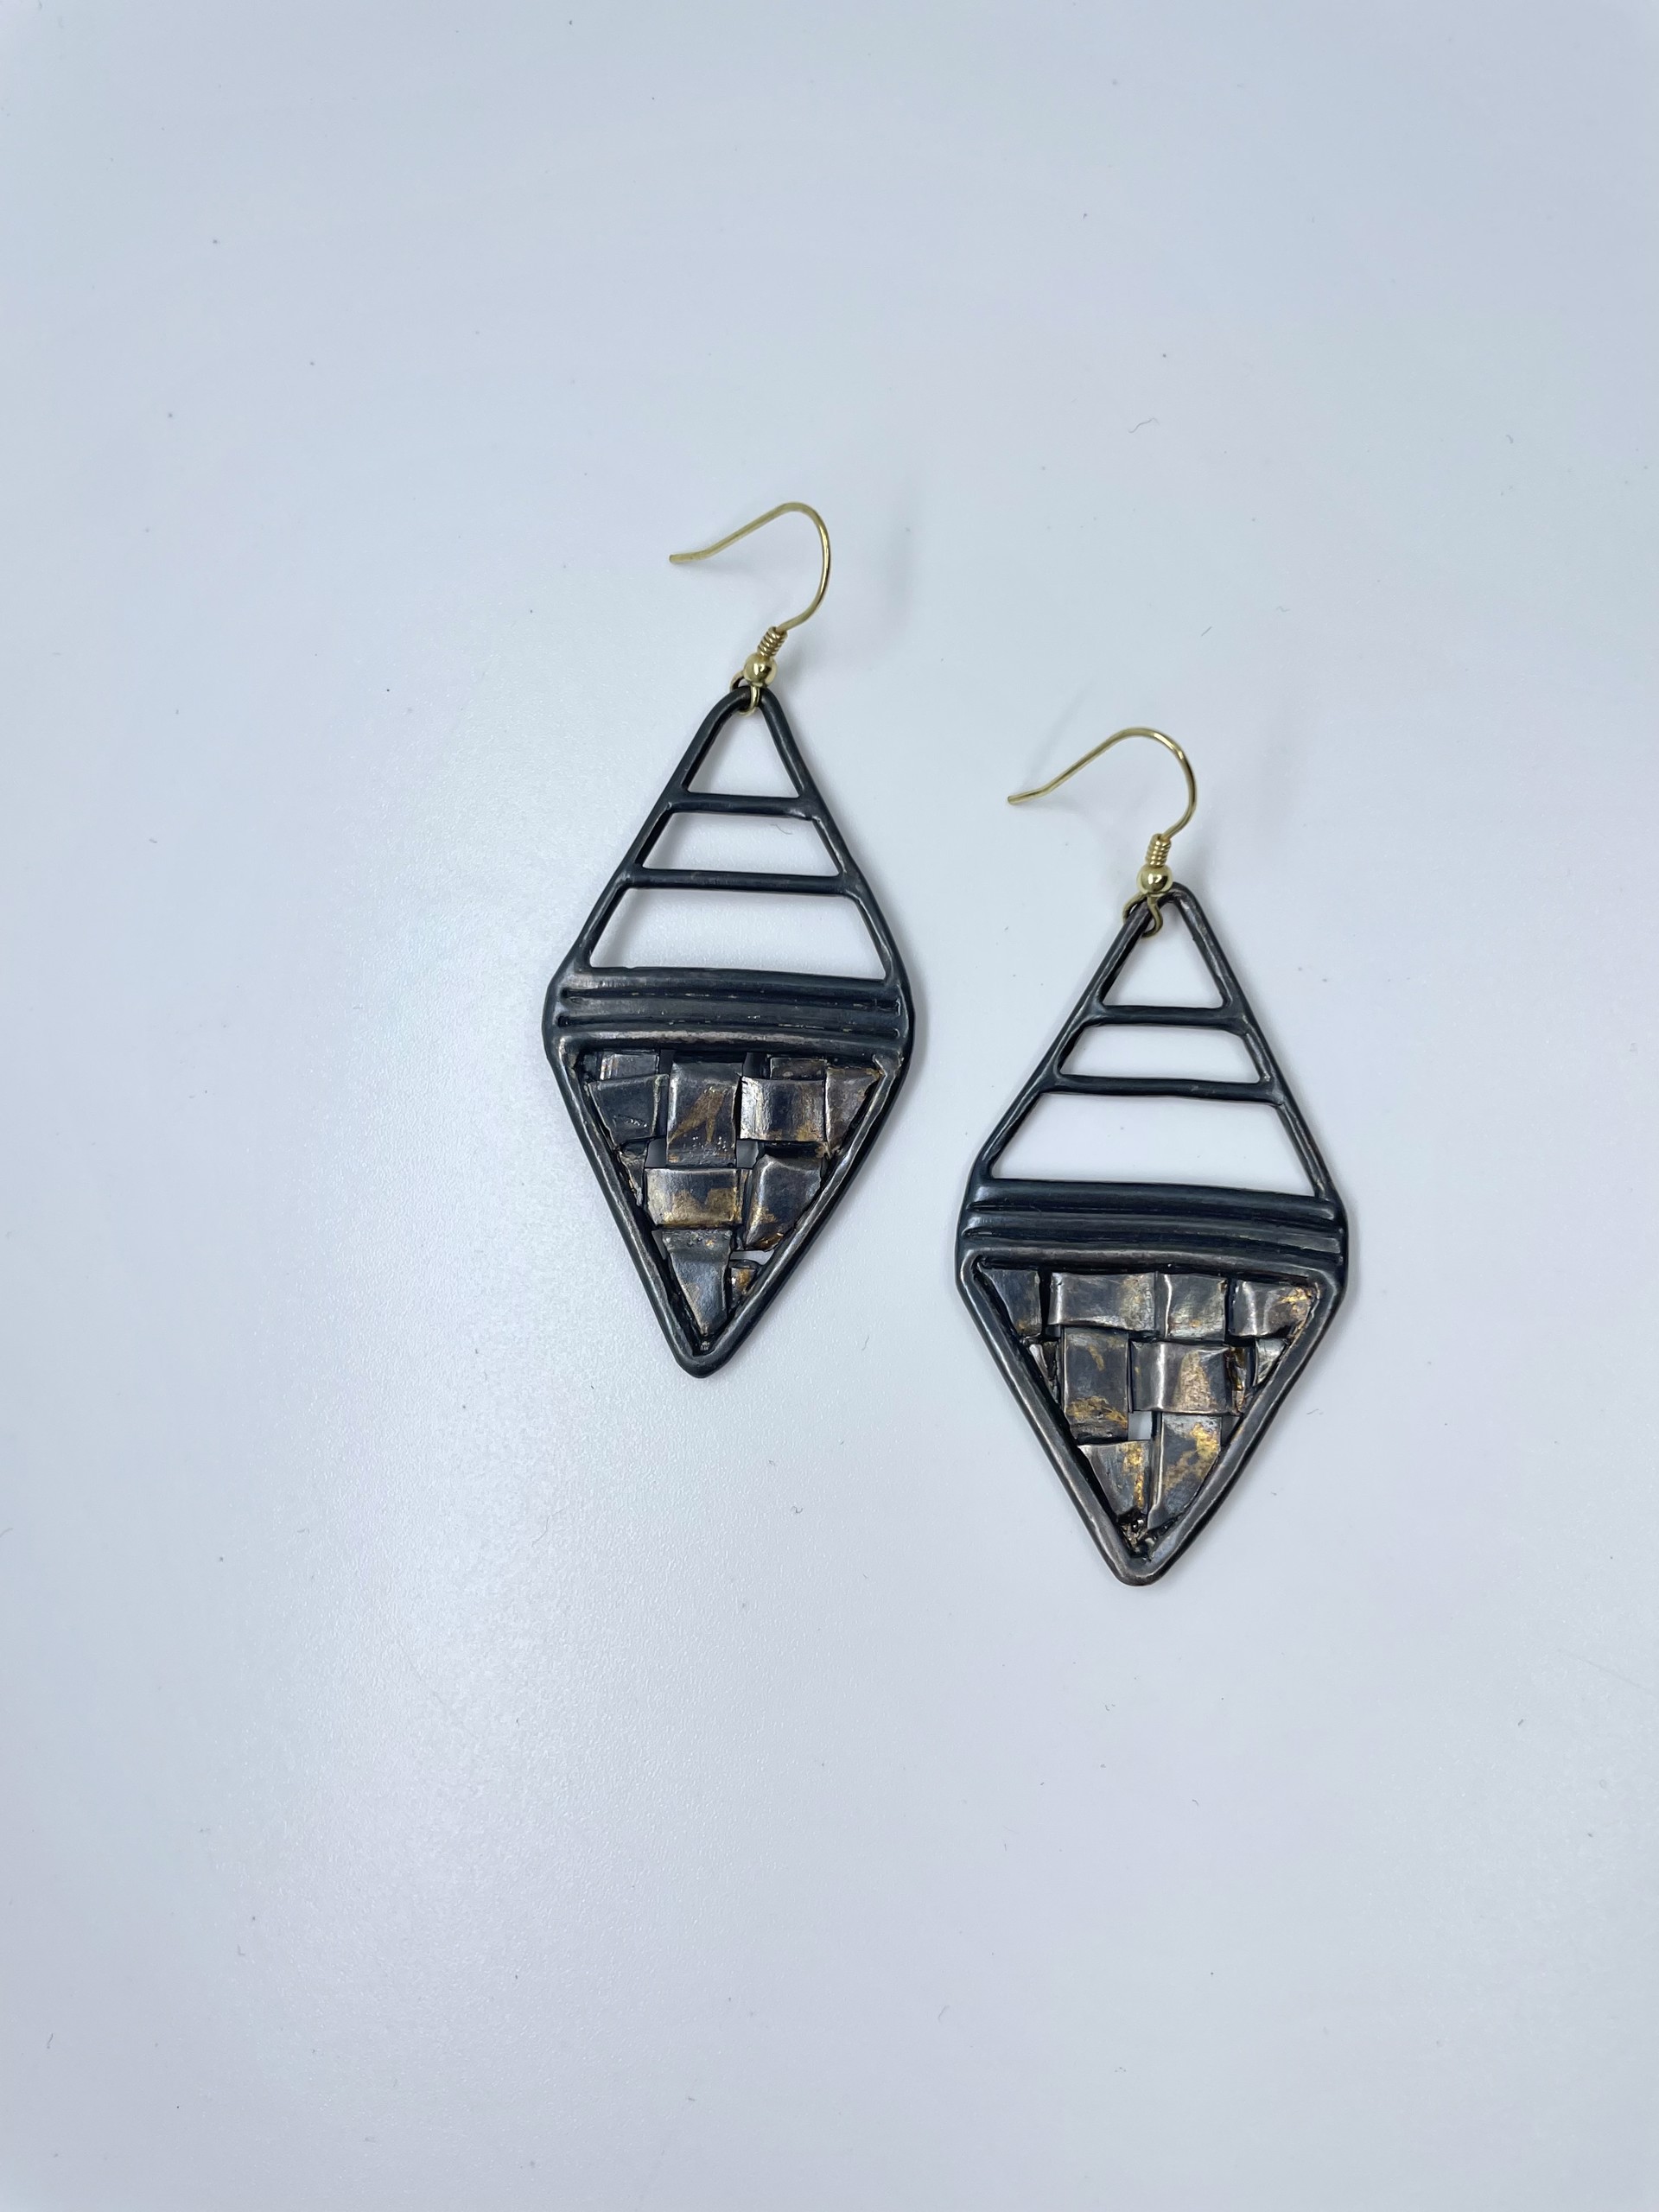 2168 Diamond Shaped Earrings with Woven Details by Beth Benowich